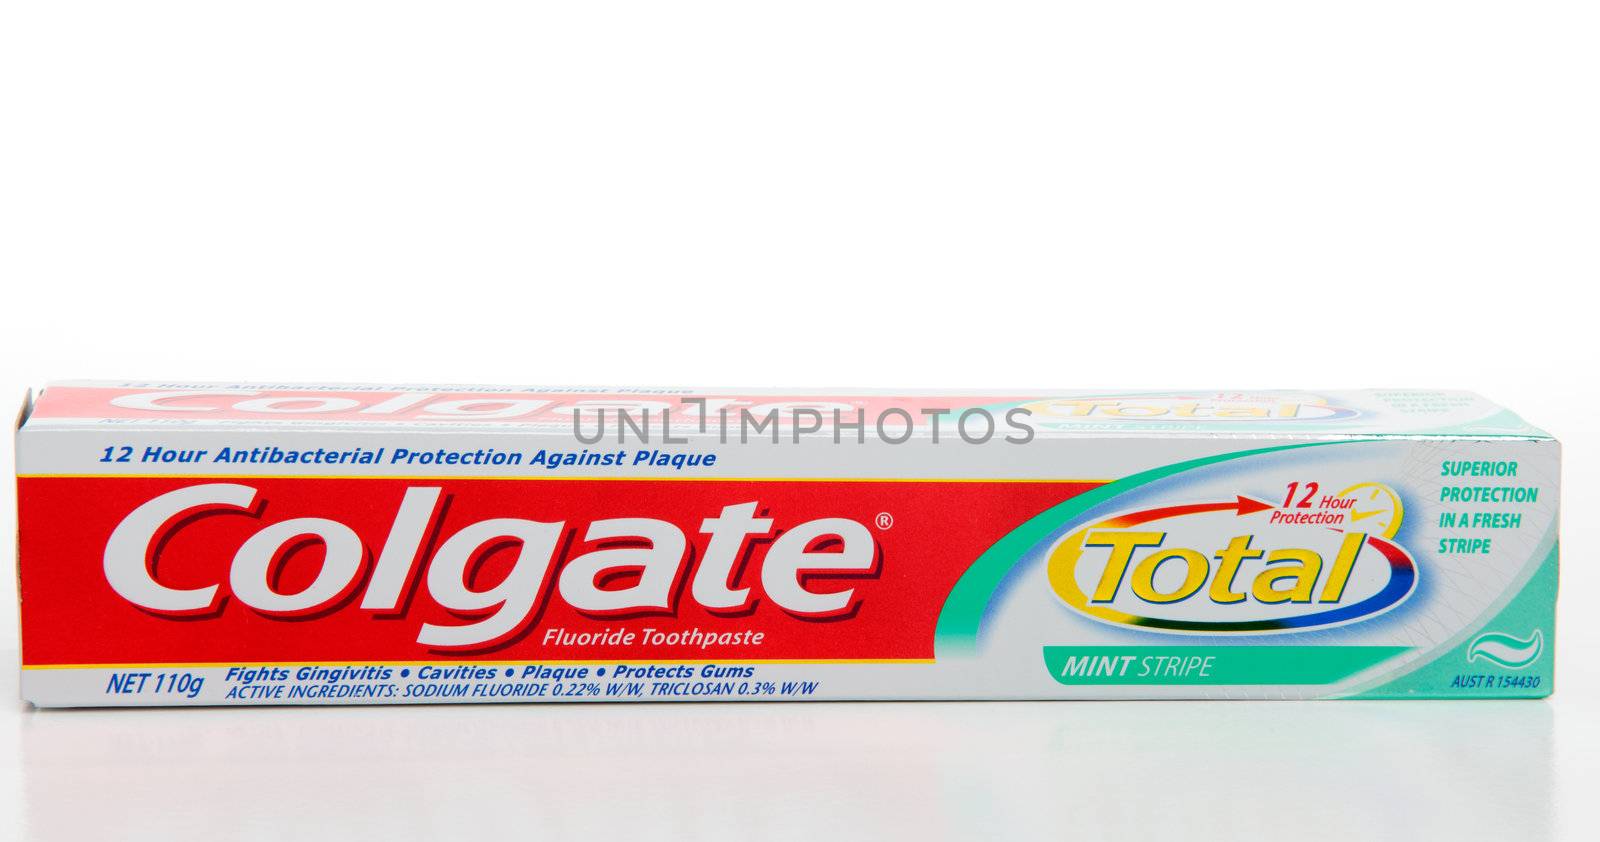 Colgate Total Protect toothpaste.  Provides 12 hours of antibacterial protection, fights gingivitis, cavities, plaque and protects gums.  White background.  Editorial Use Only.